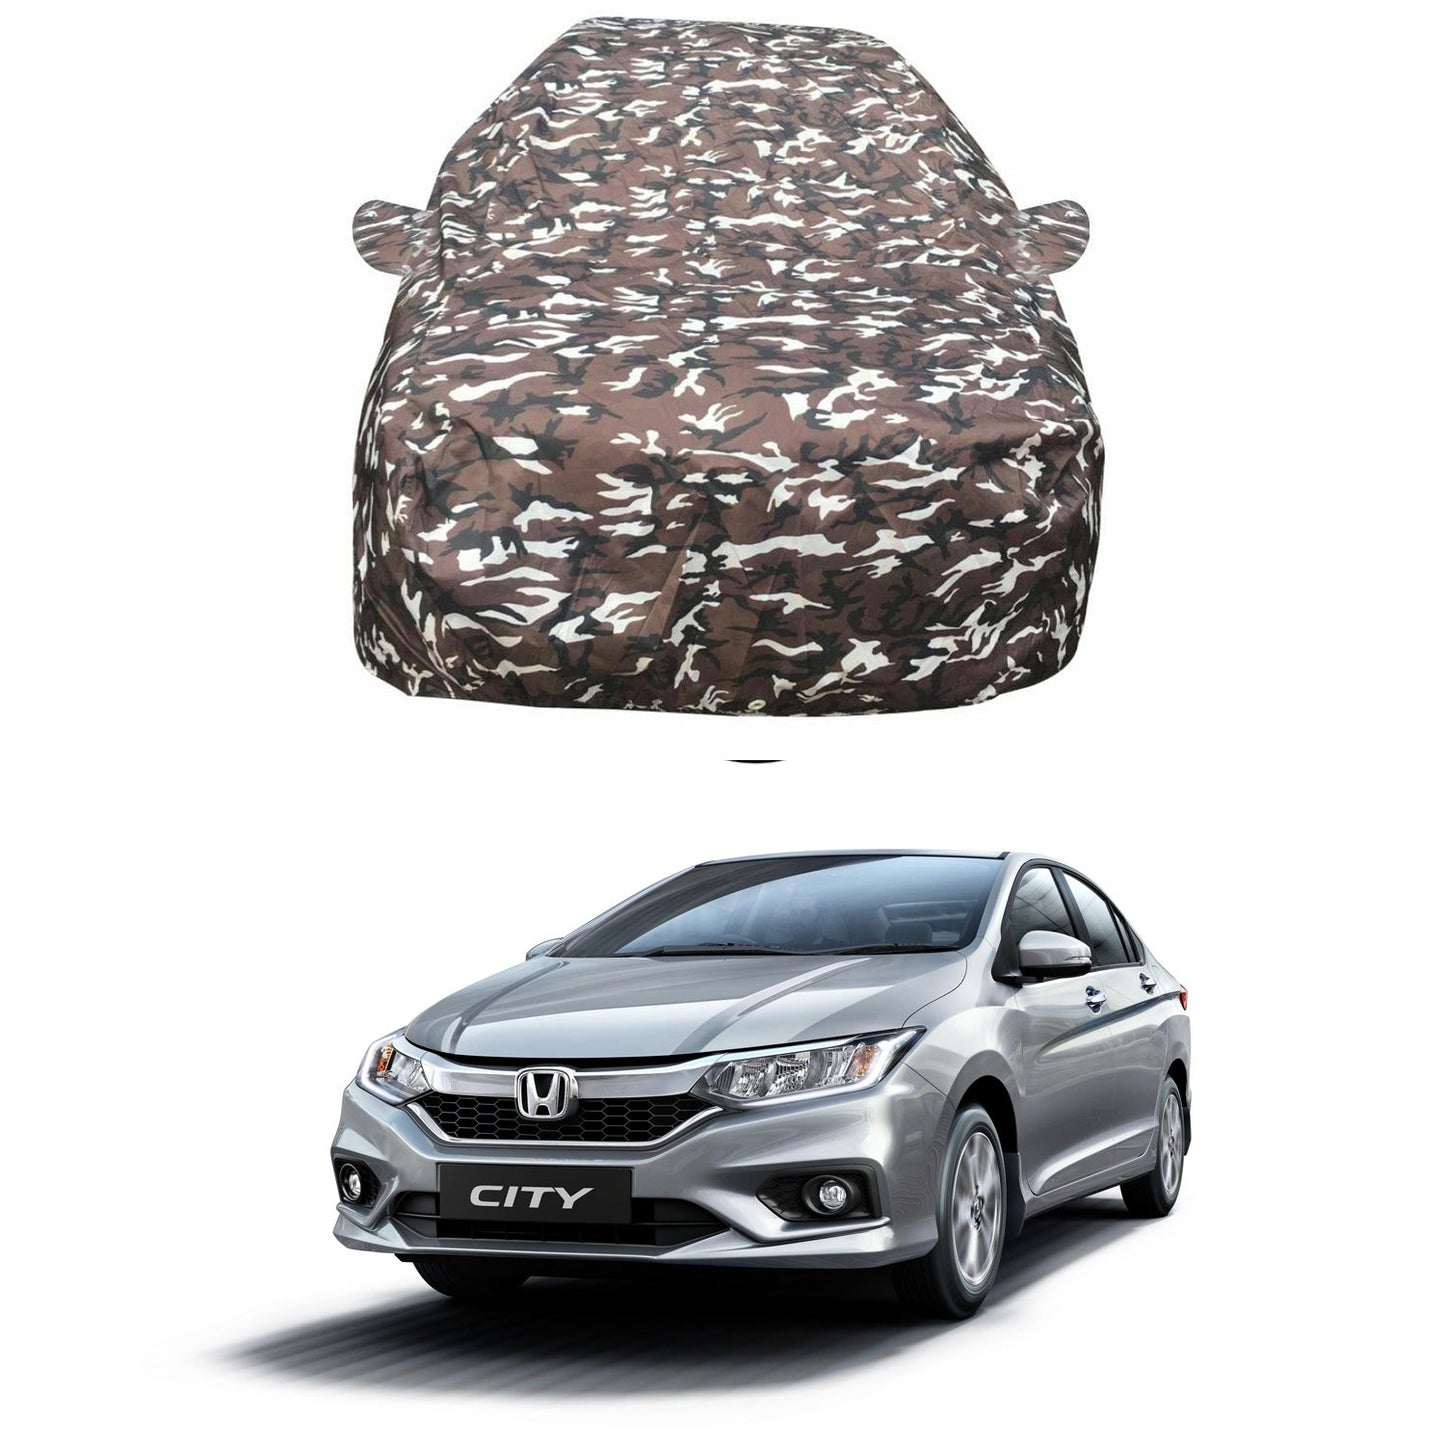 Oshotto Ranger Design Made of 100% Waterproof Fabric Multicolor Car Body Cover with Mirror Pocket For Honda City Old/ZX